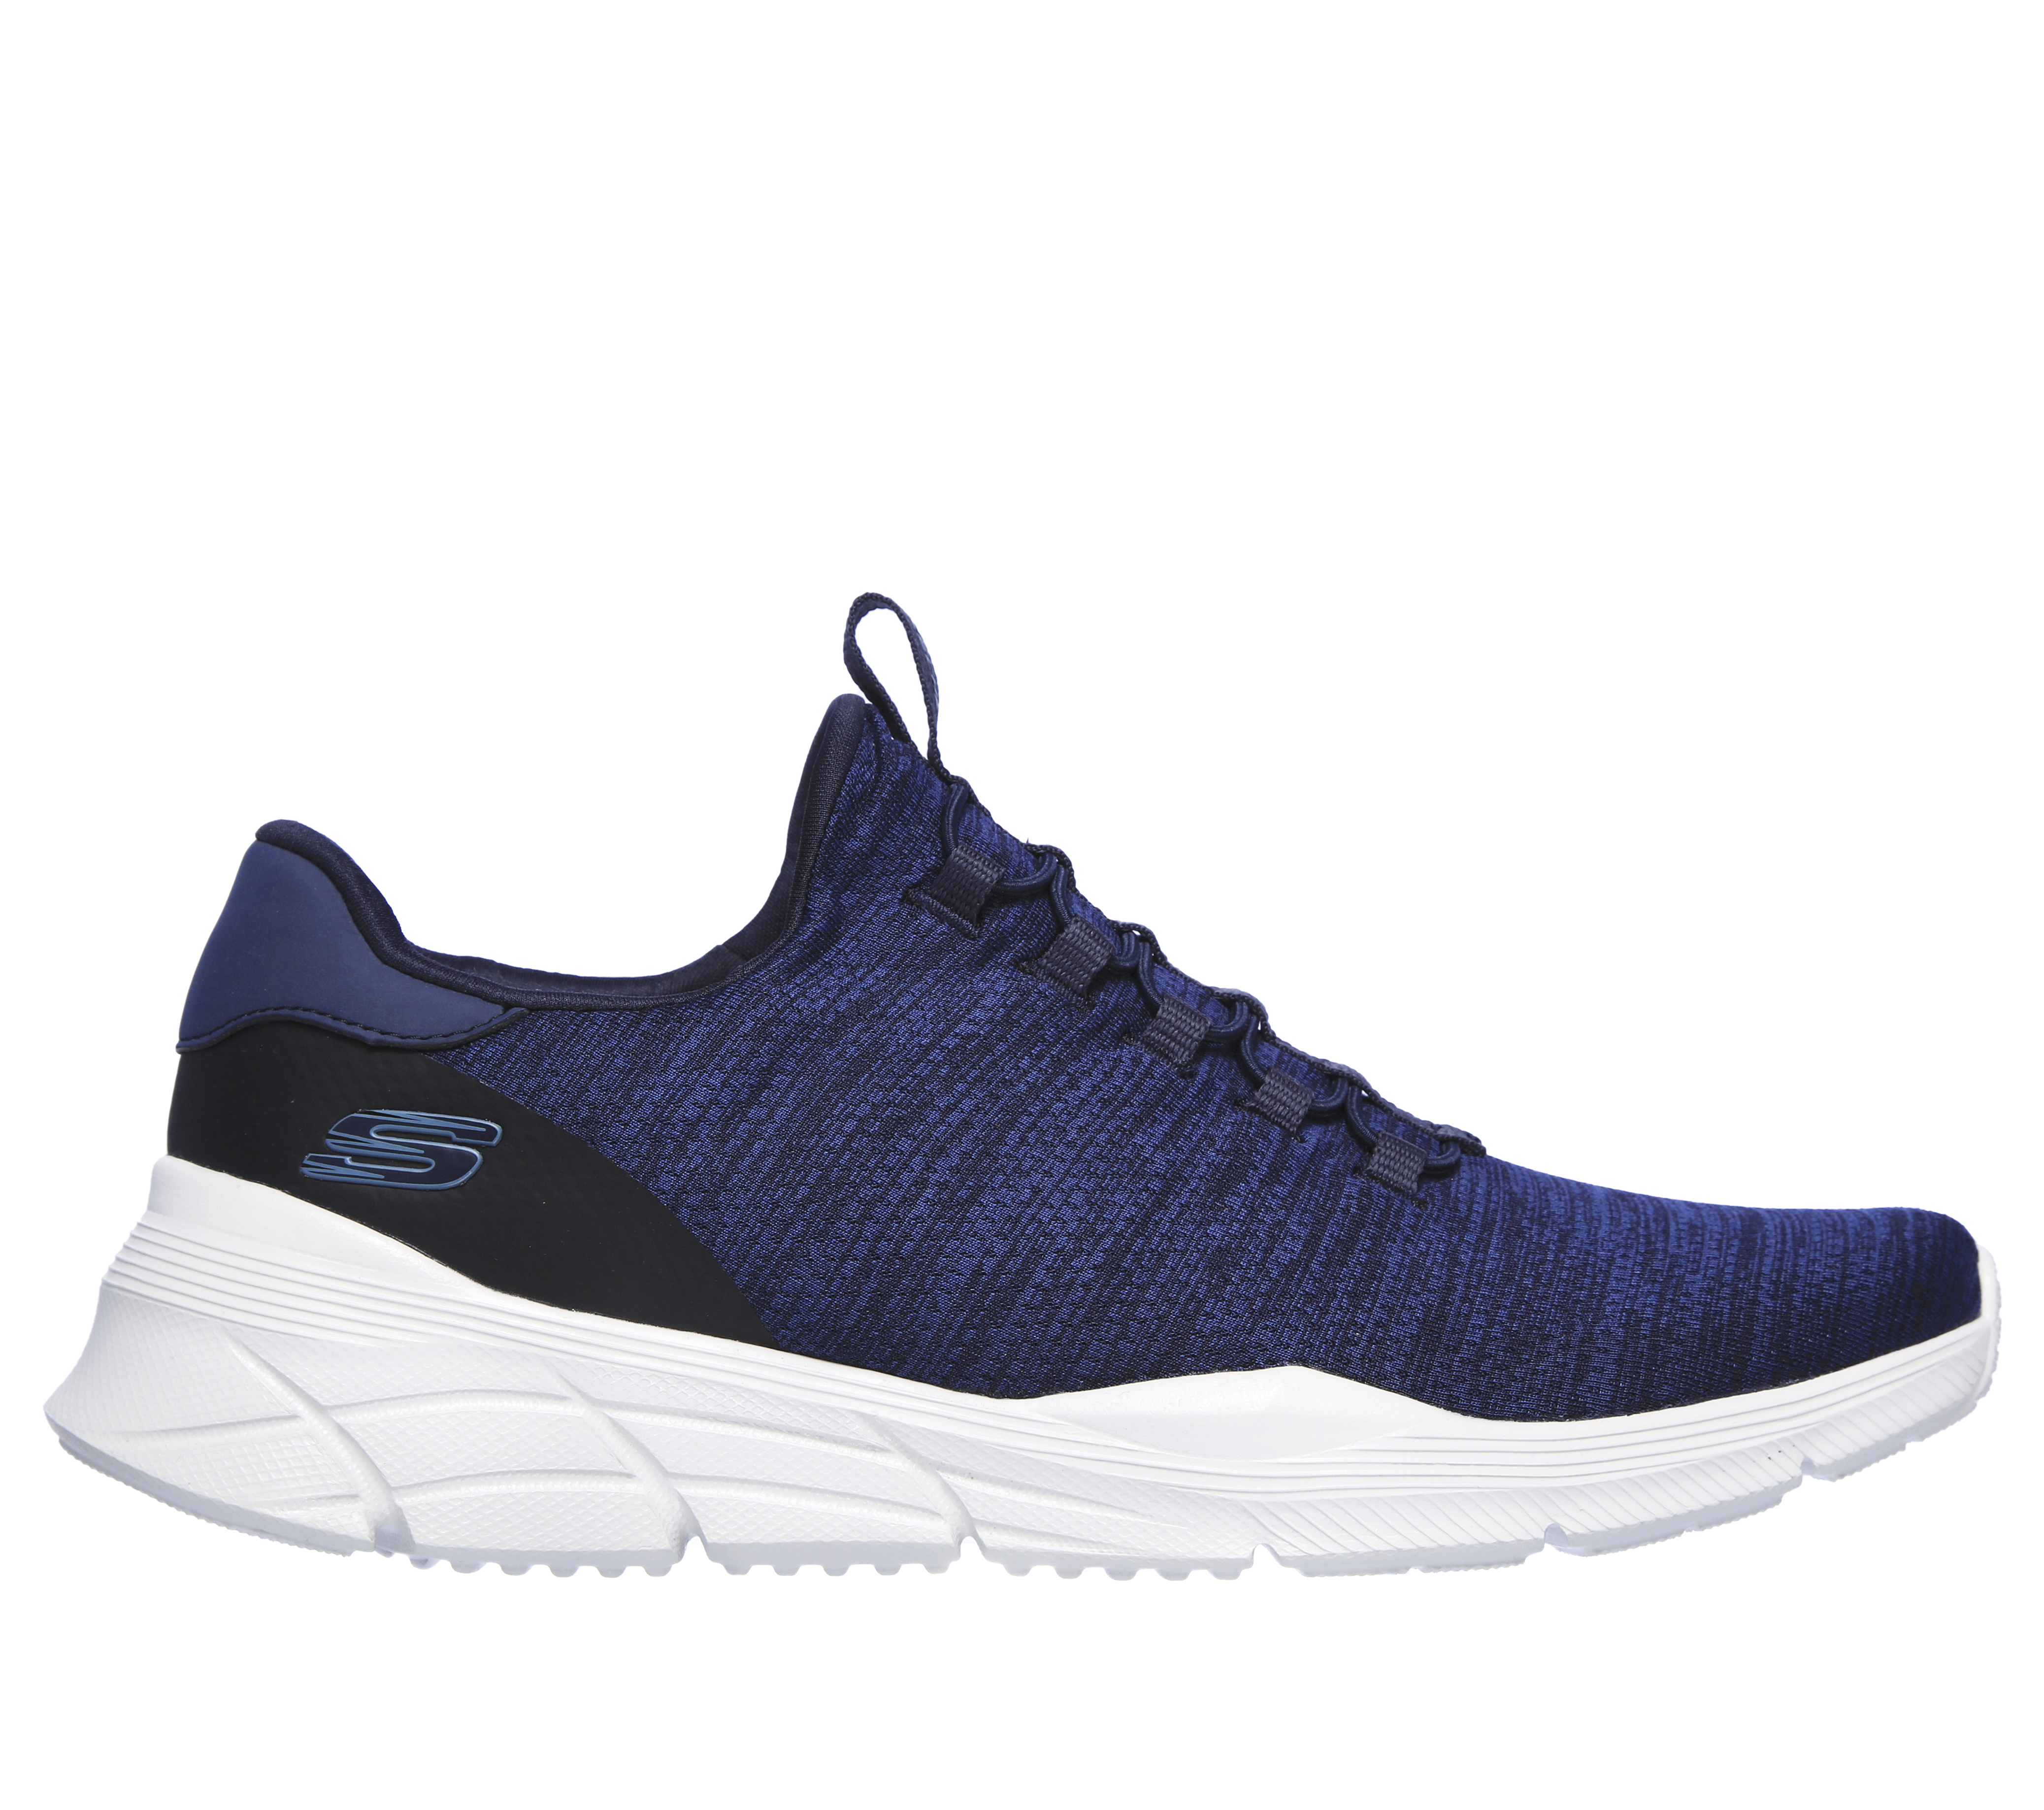 skechers relaxed fit valeris perfect storm